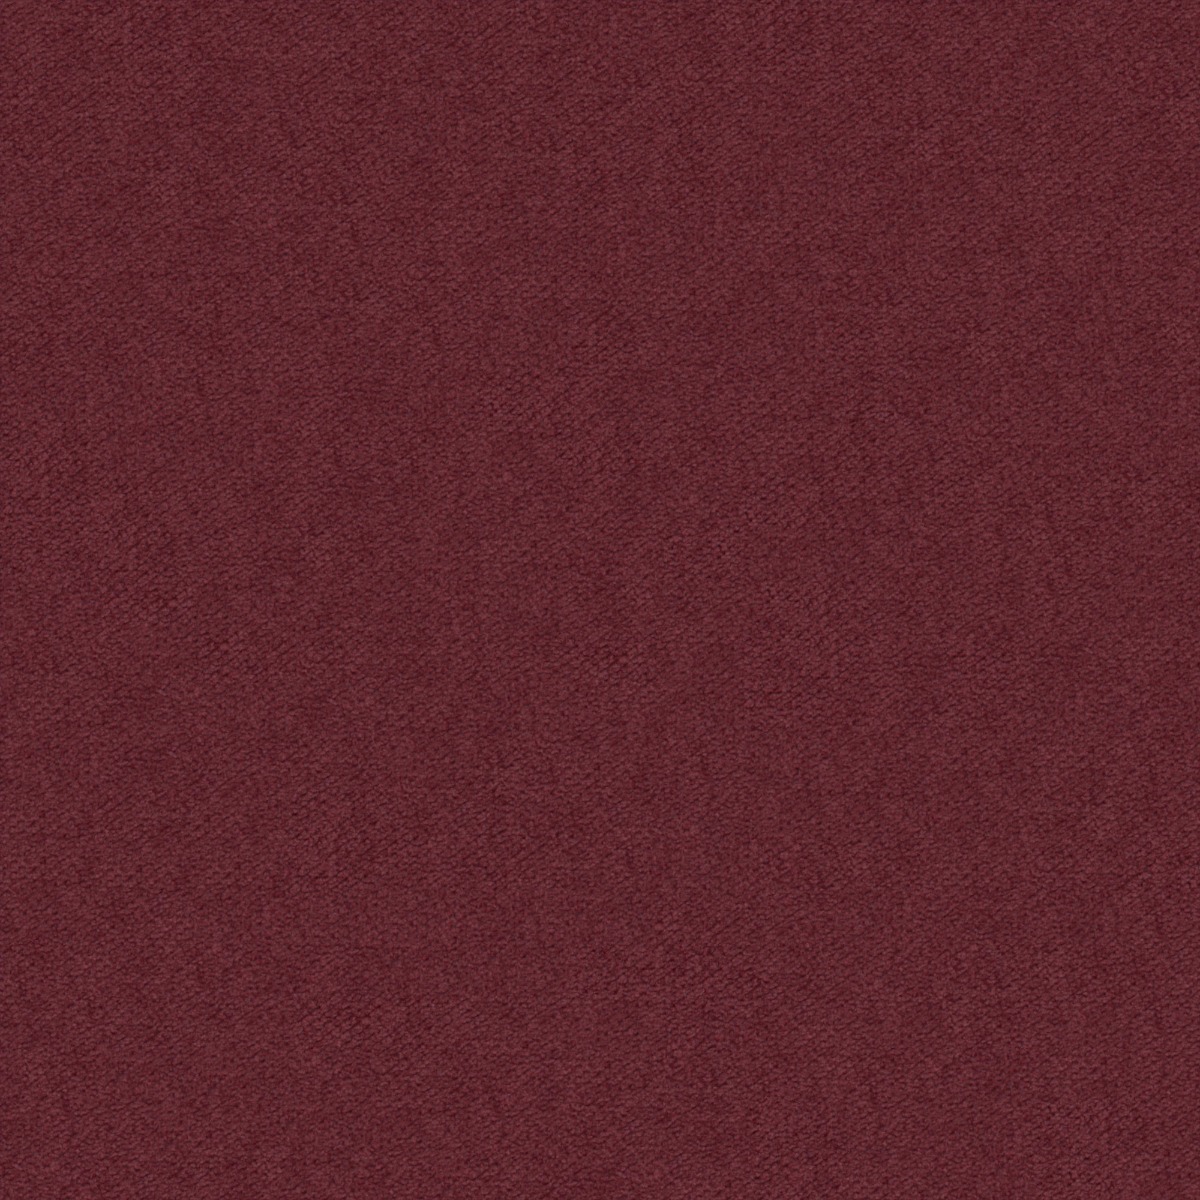 A seamless fabric texture with plain red velvet units arranged in a None pattern